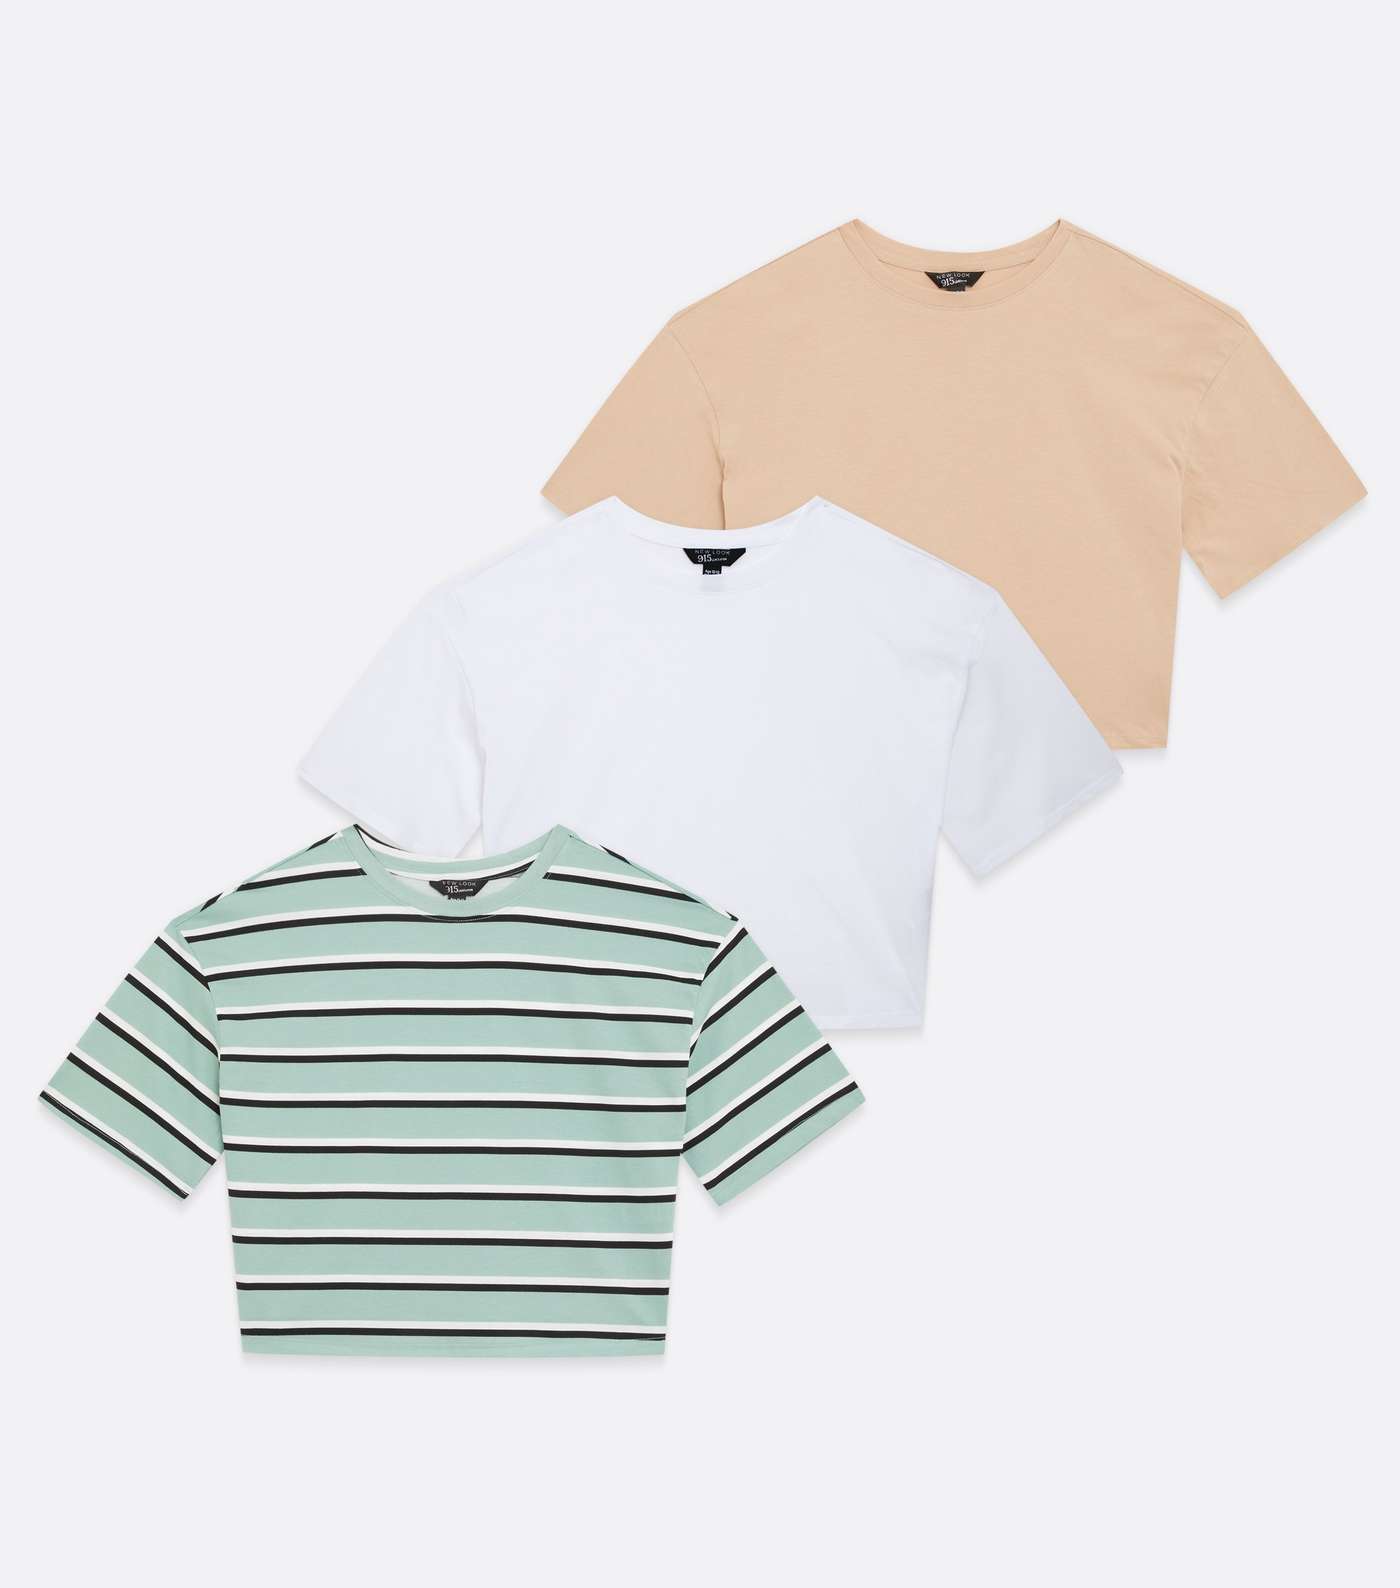 Girls 3 Pack Green Stripe White and Camel T-Shirts Image 5